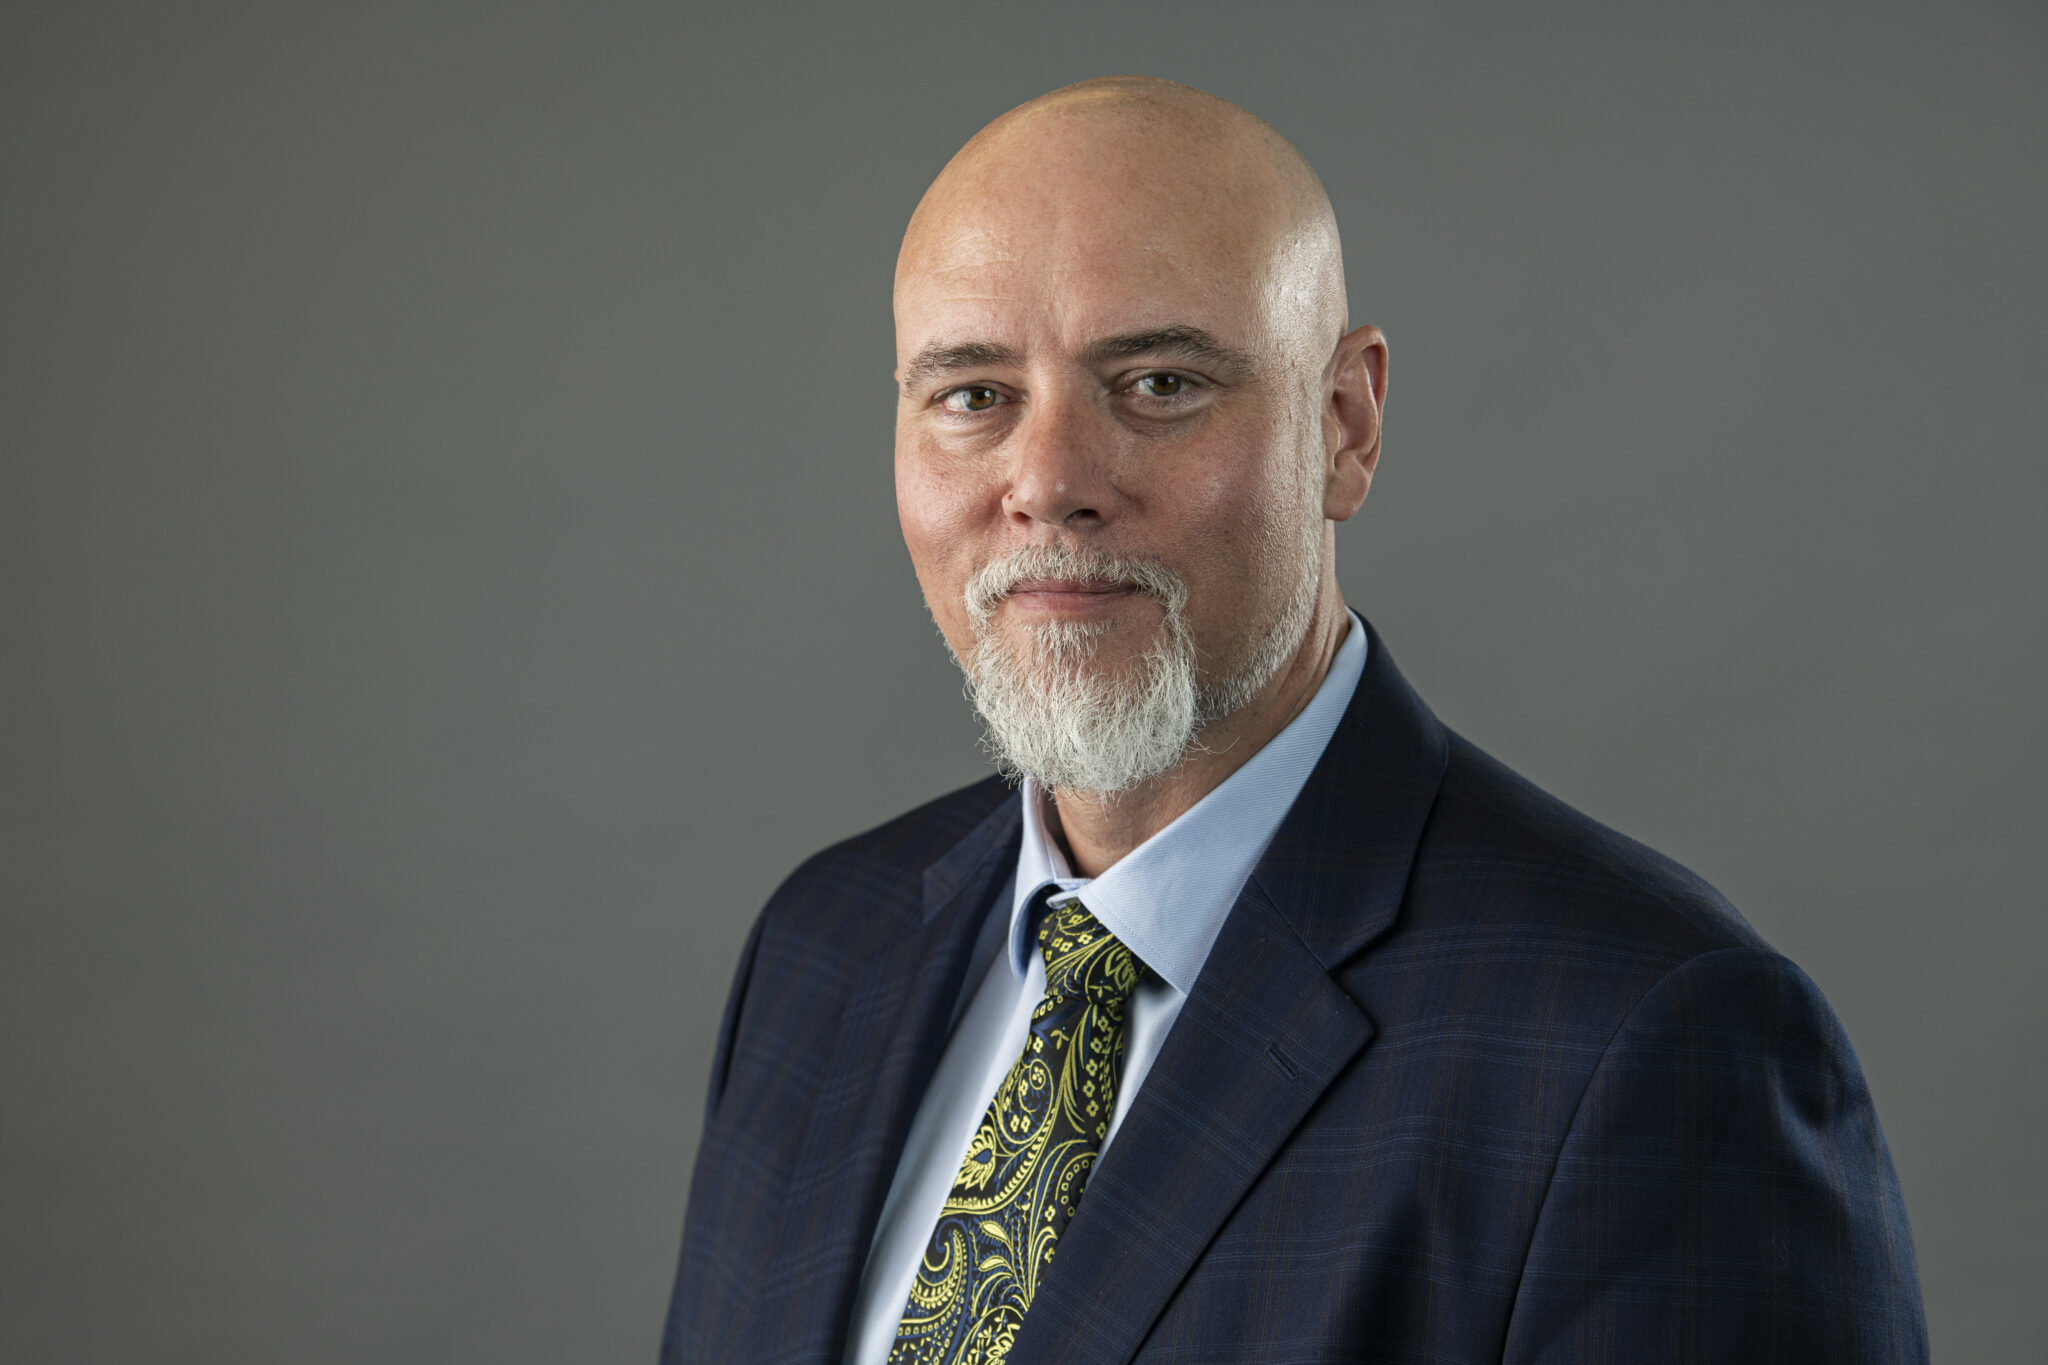 Missouri S&T alumnus named vice provost, dean of the College of ... - Missouri S&T News and Research